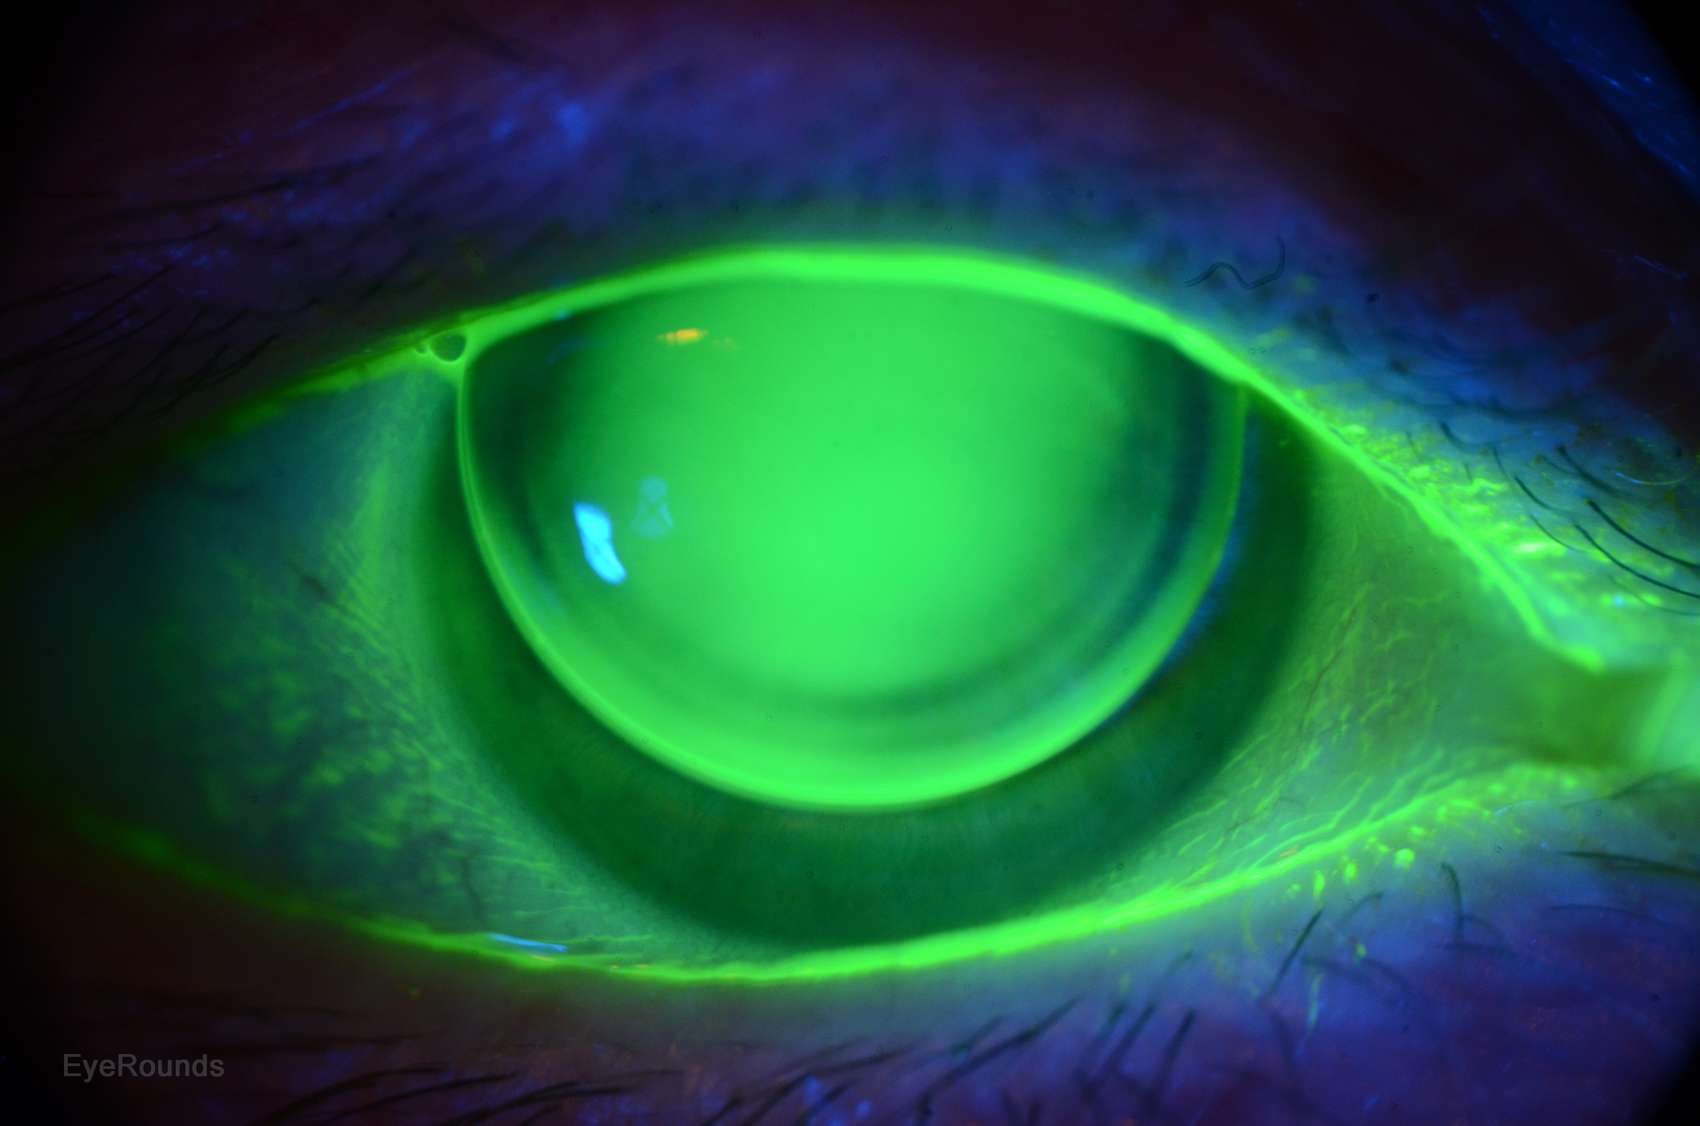 typical-corneal-rigid-gas-permeable-rgp-contact-lens